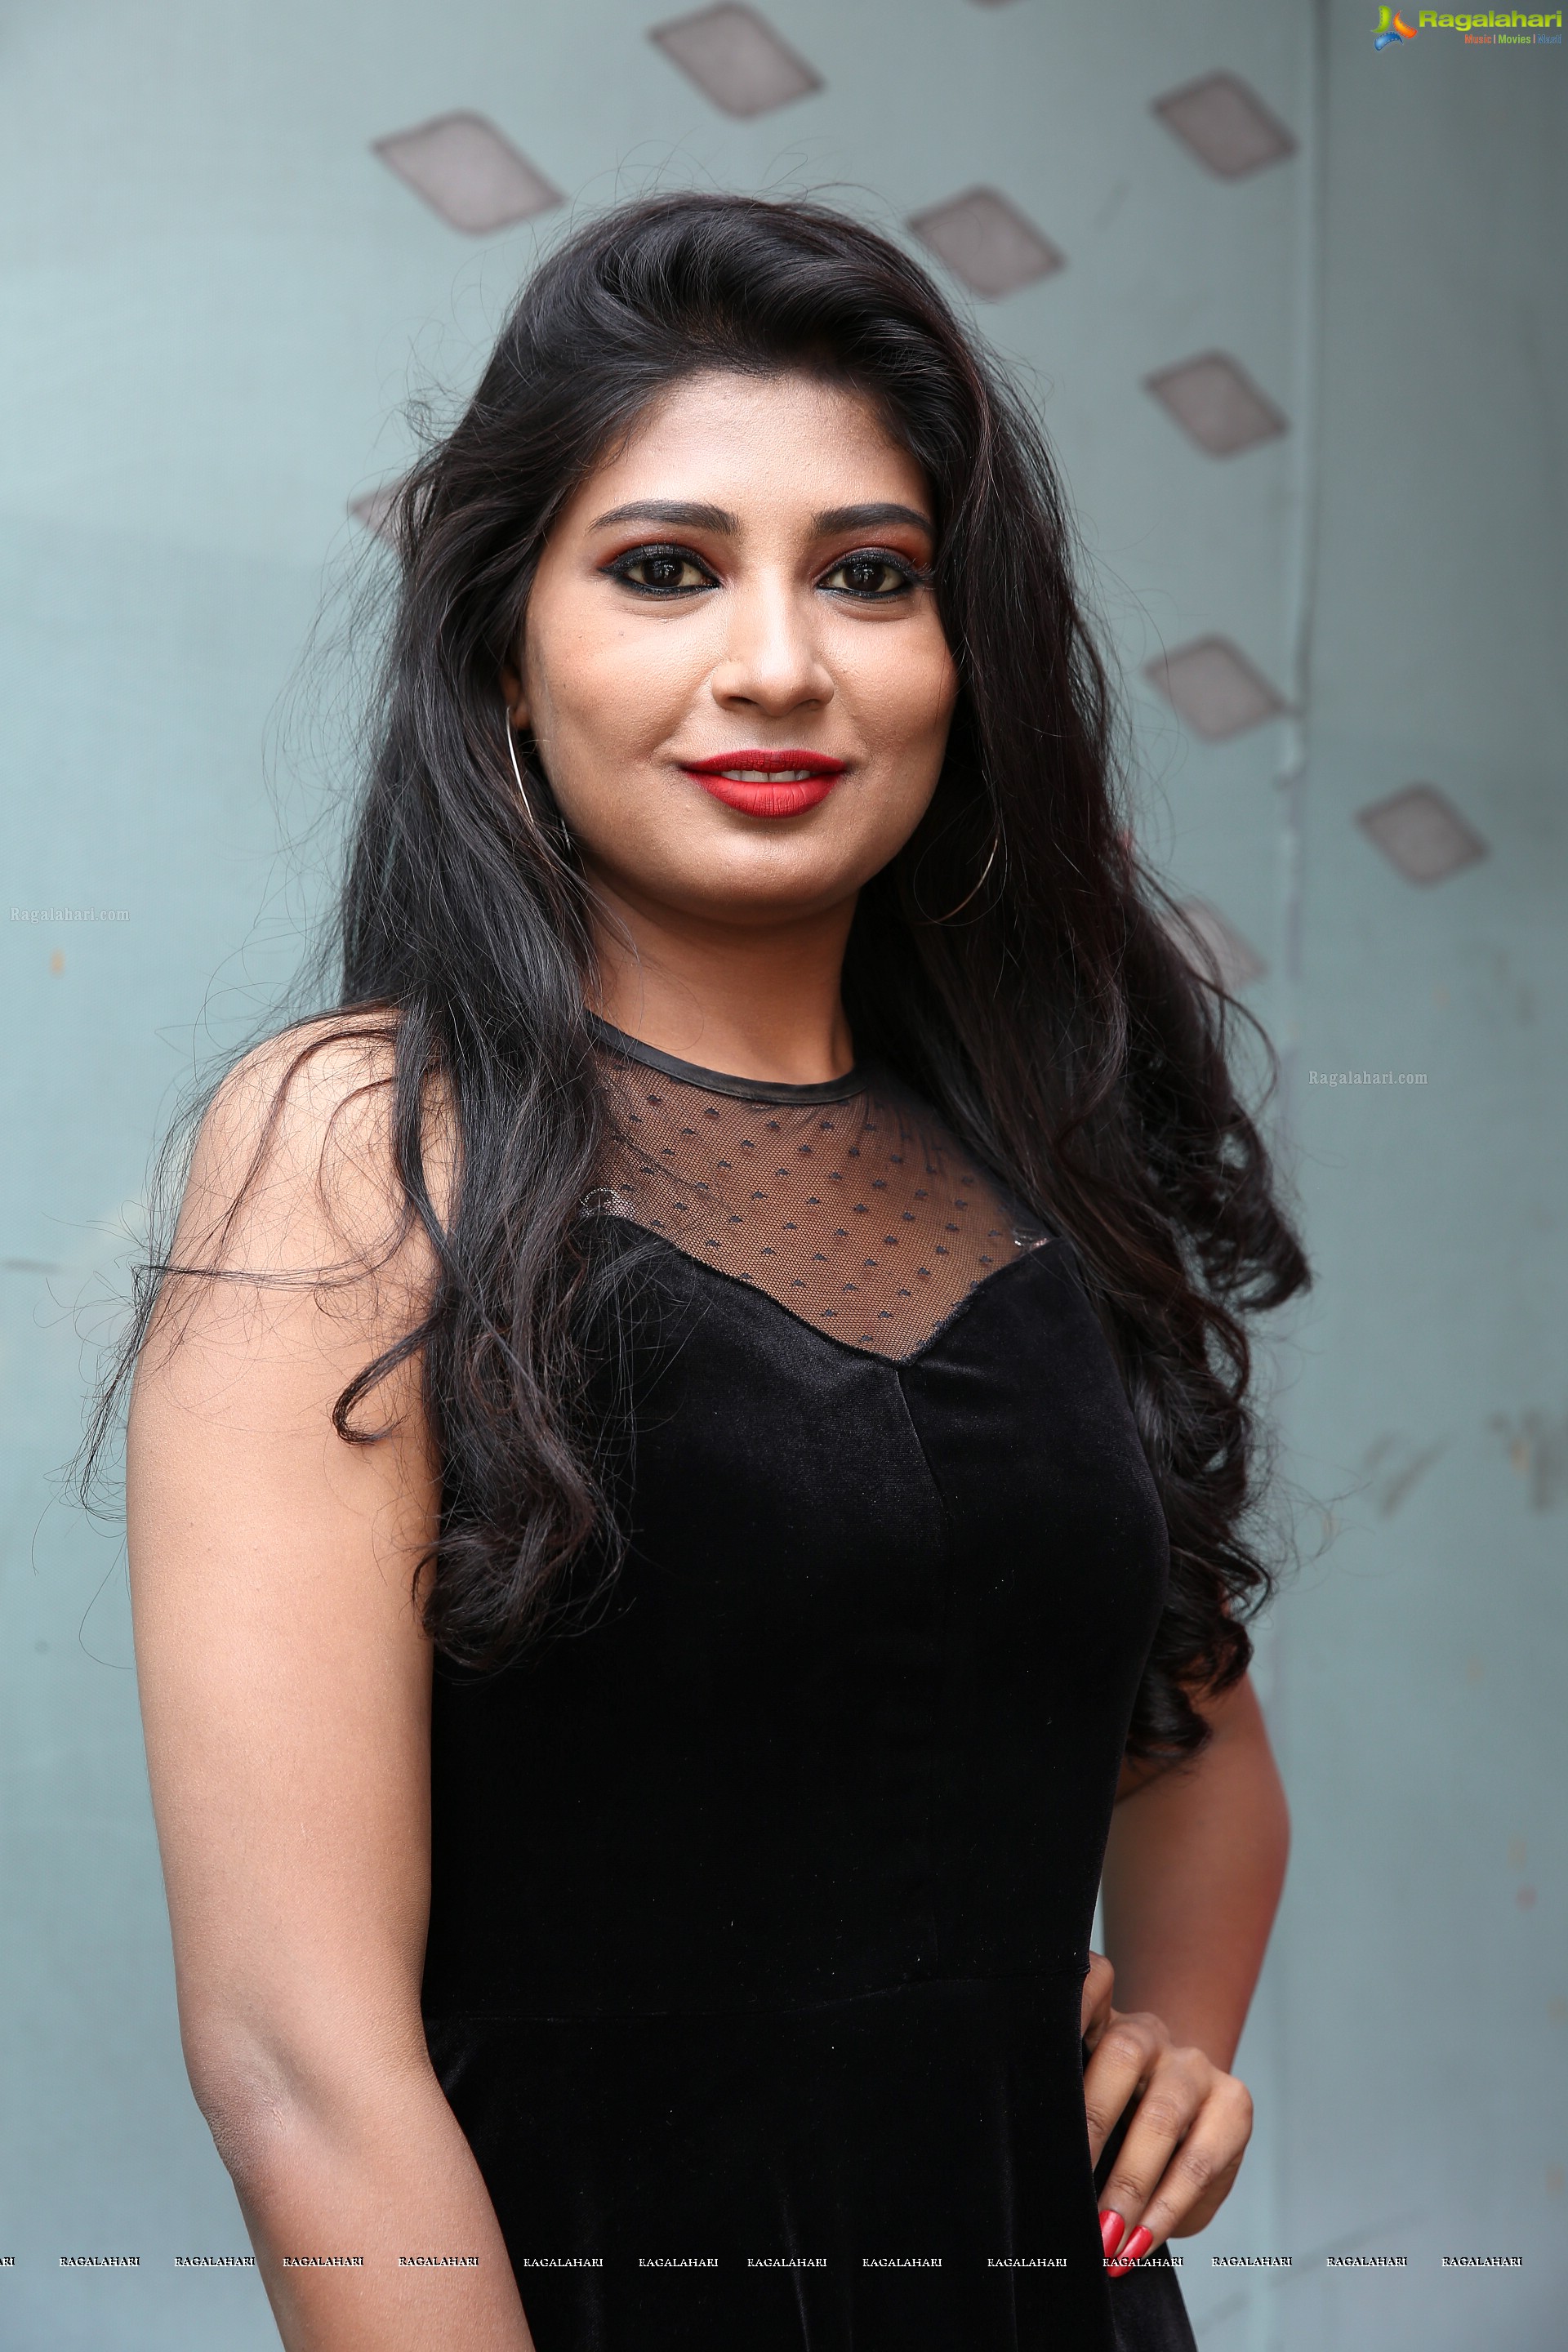 Sanjana Choudhary @ Scoops New Flavors Launch - HD Gallery